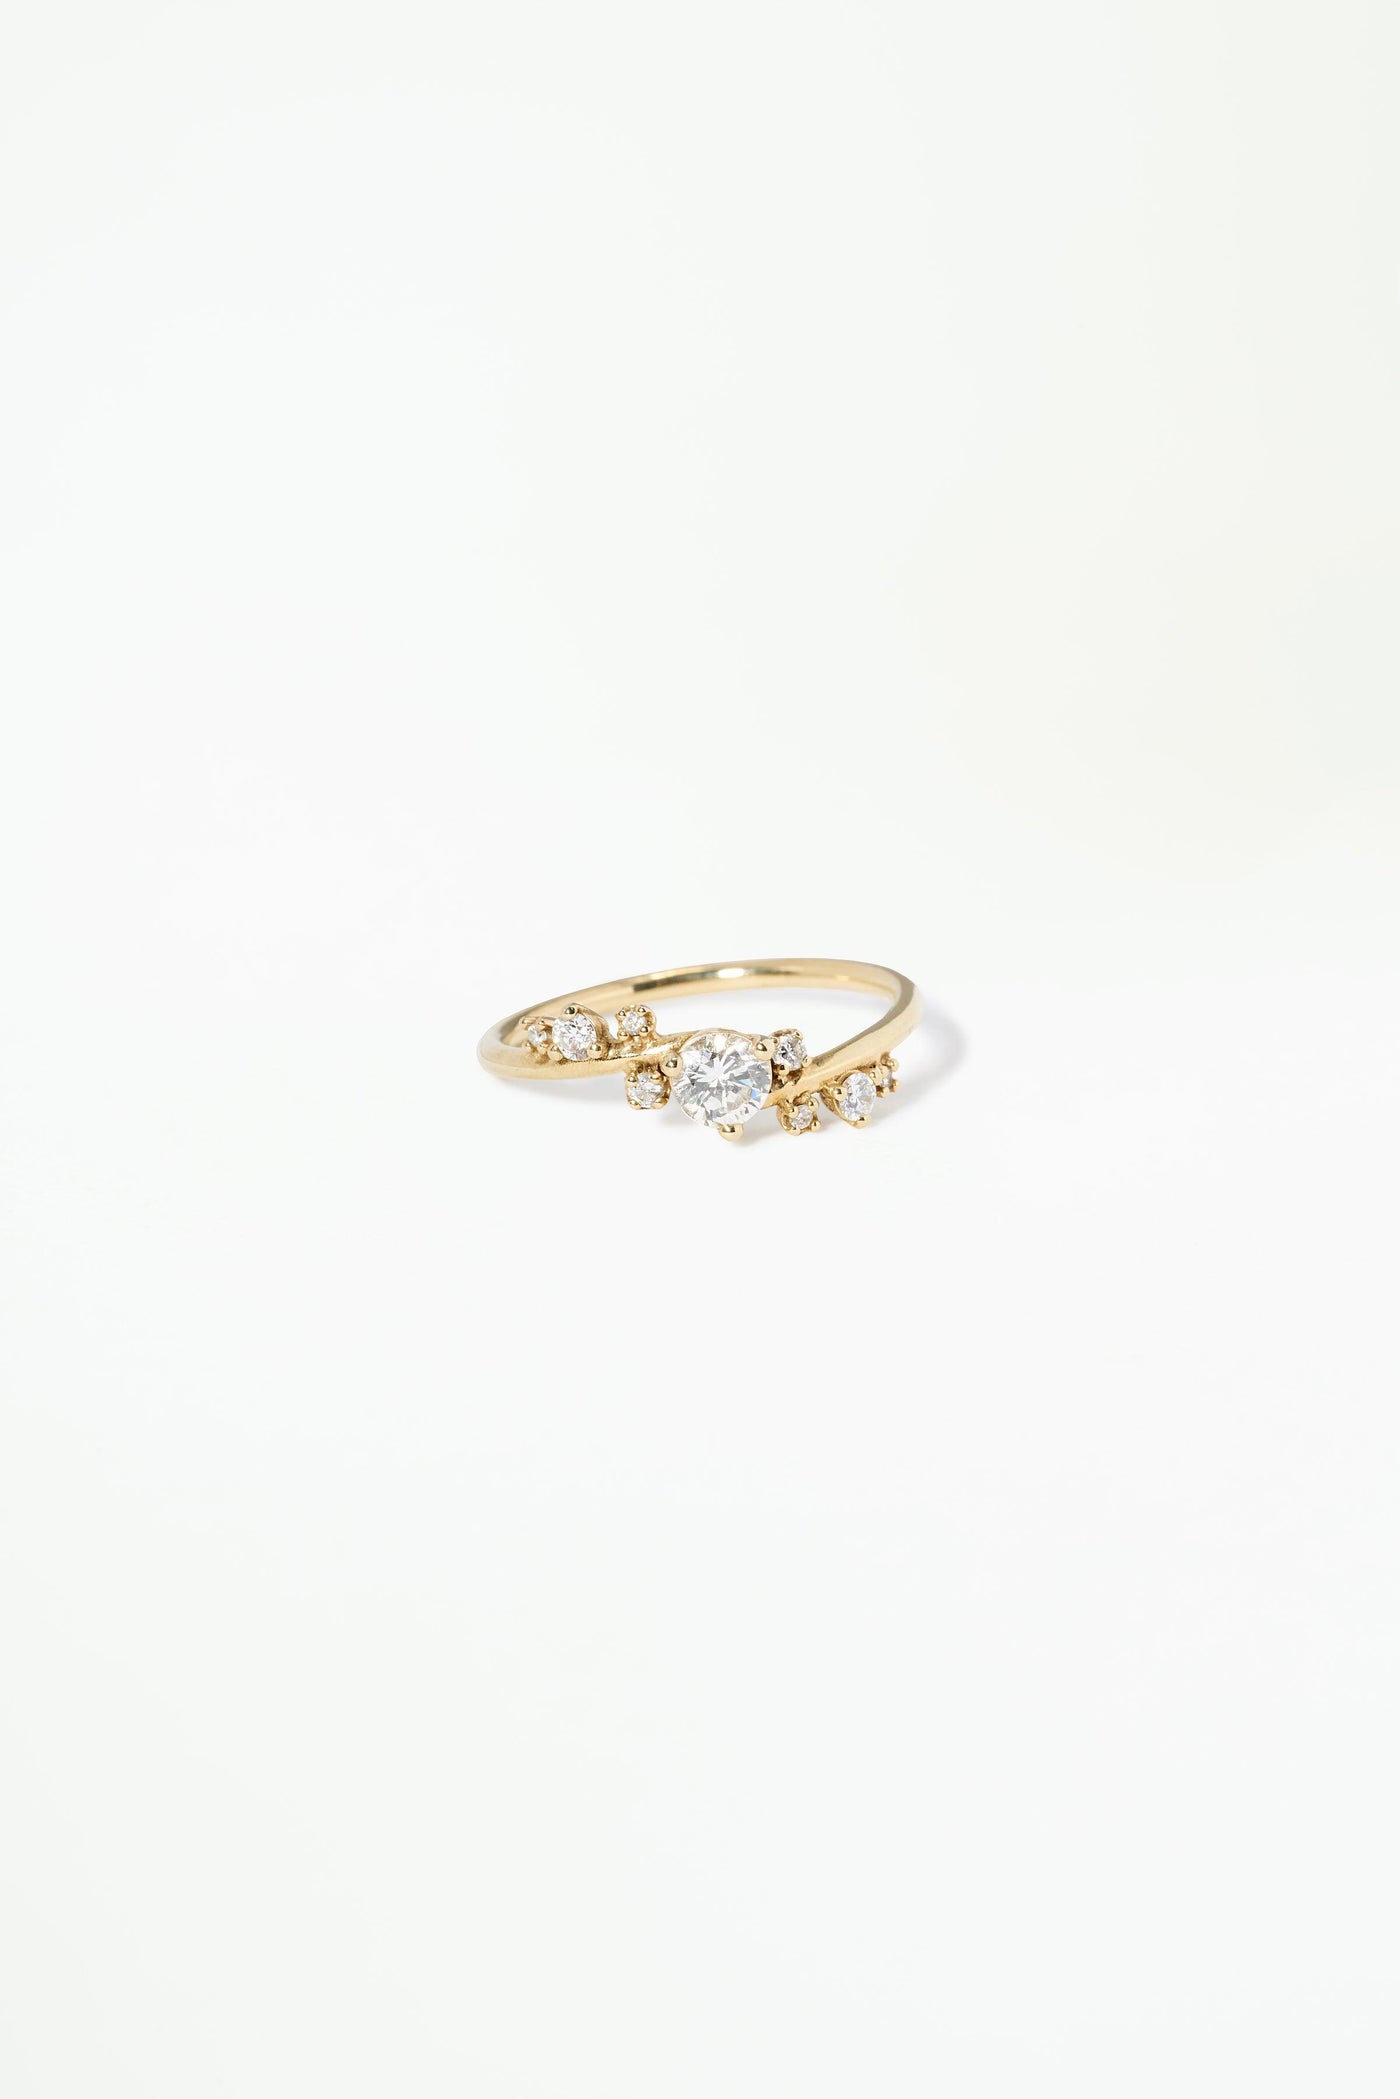 Tanishq Daniella Diamond Ring Price Starting From Rs 67,733 | Find Verified  Sellers at Justdial